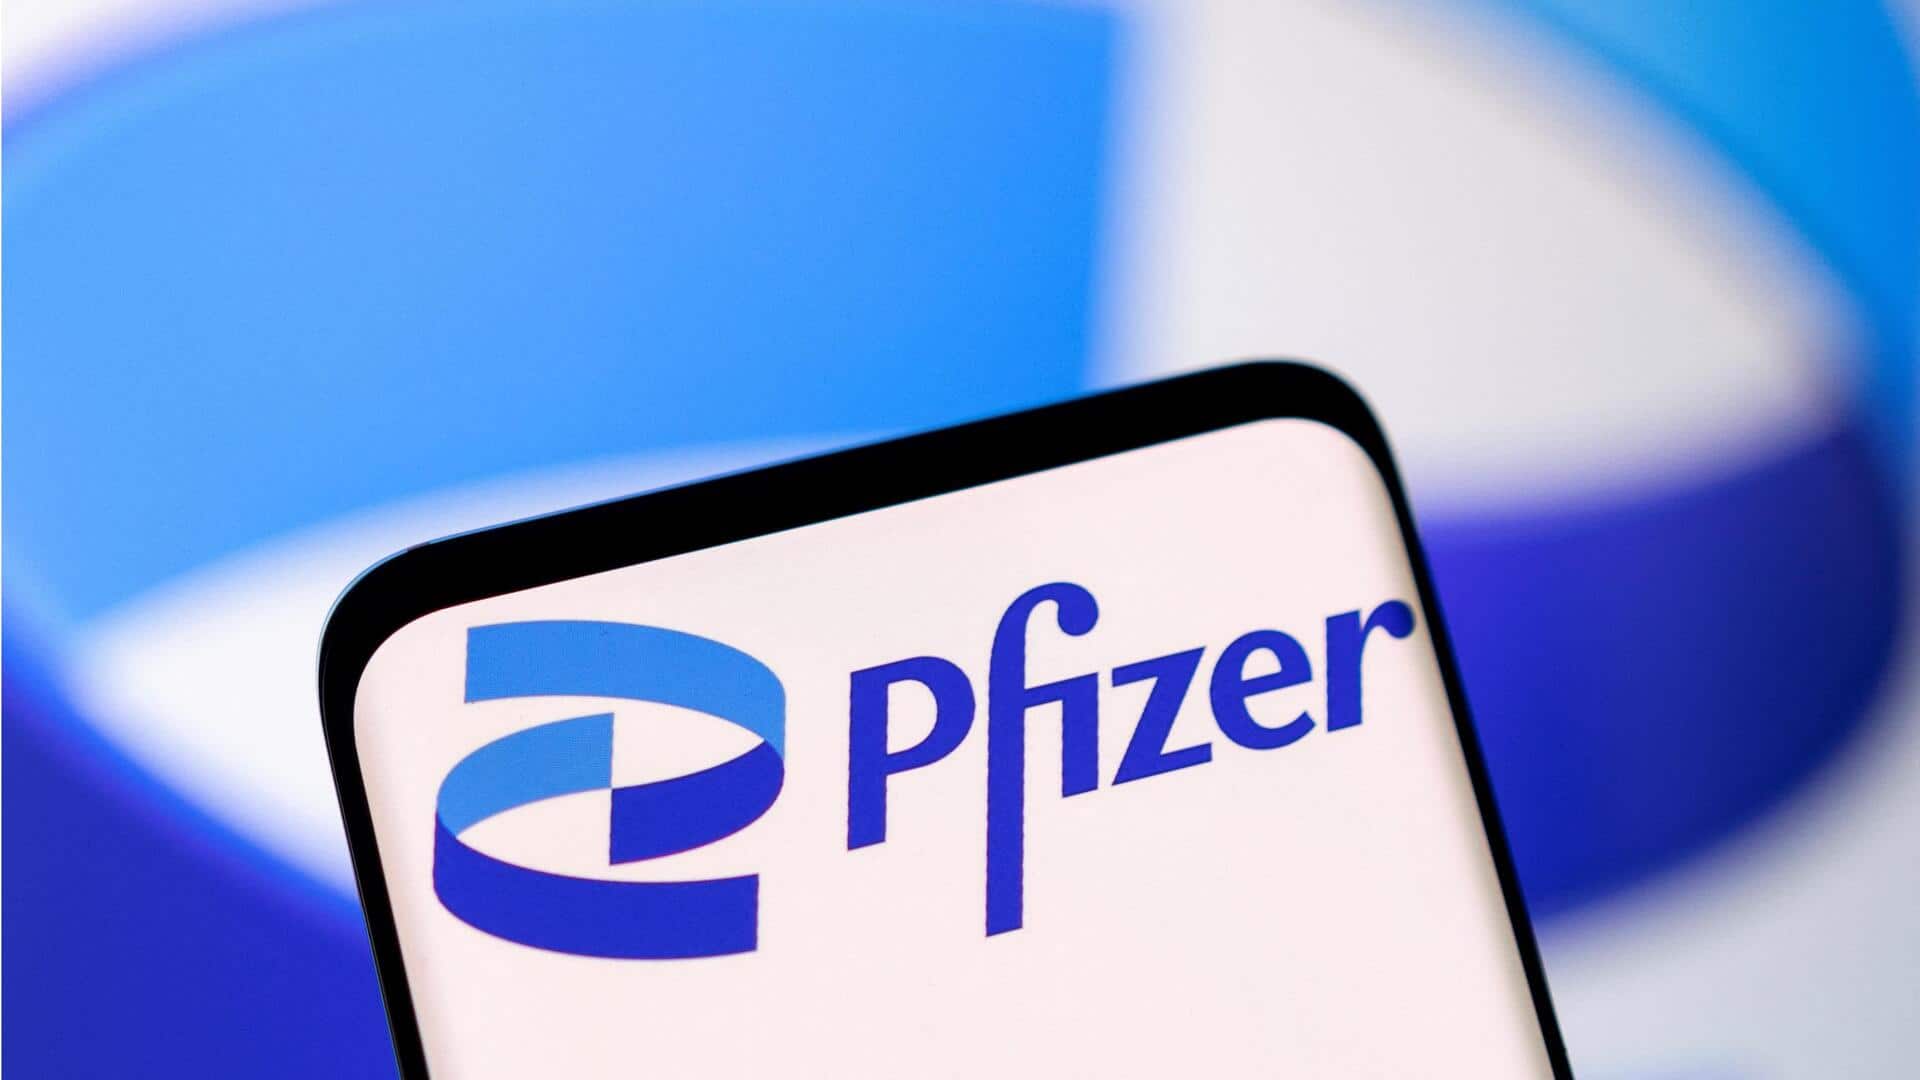 Pfizer agrees to settle over 10,000 Zantac cancer lawsuits